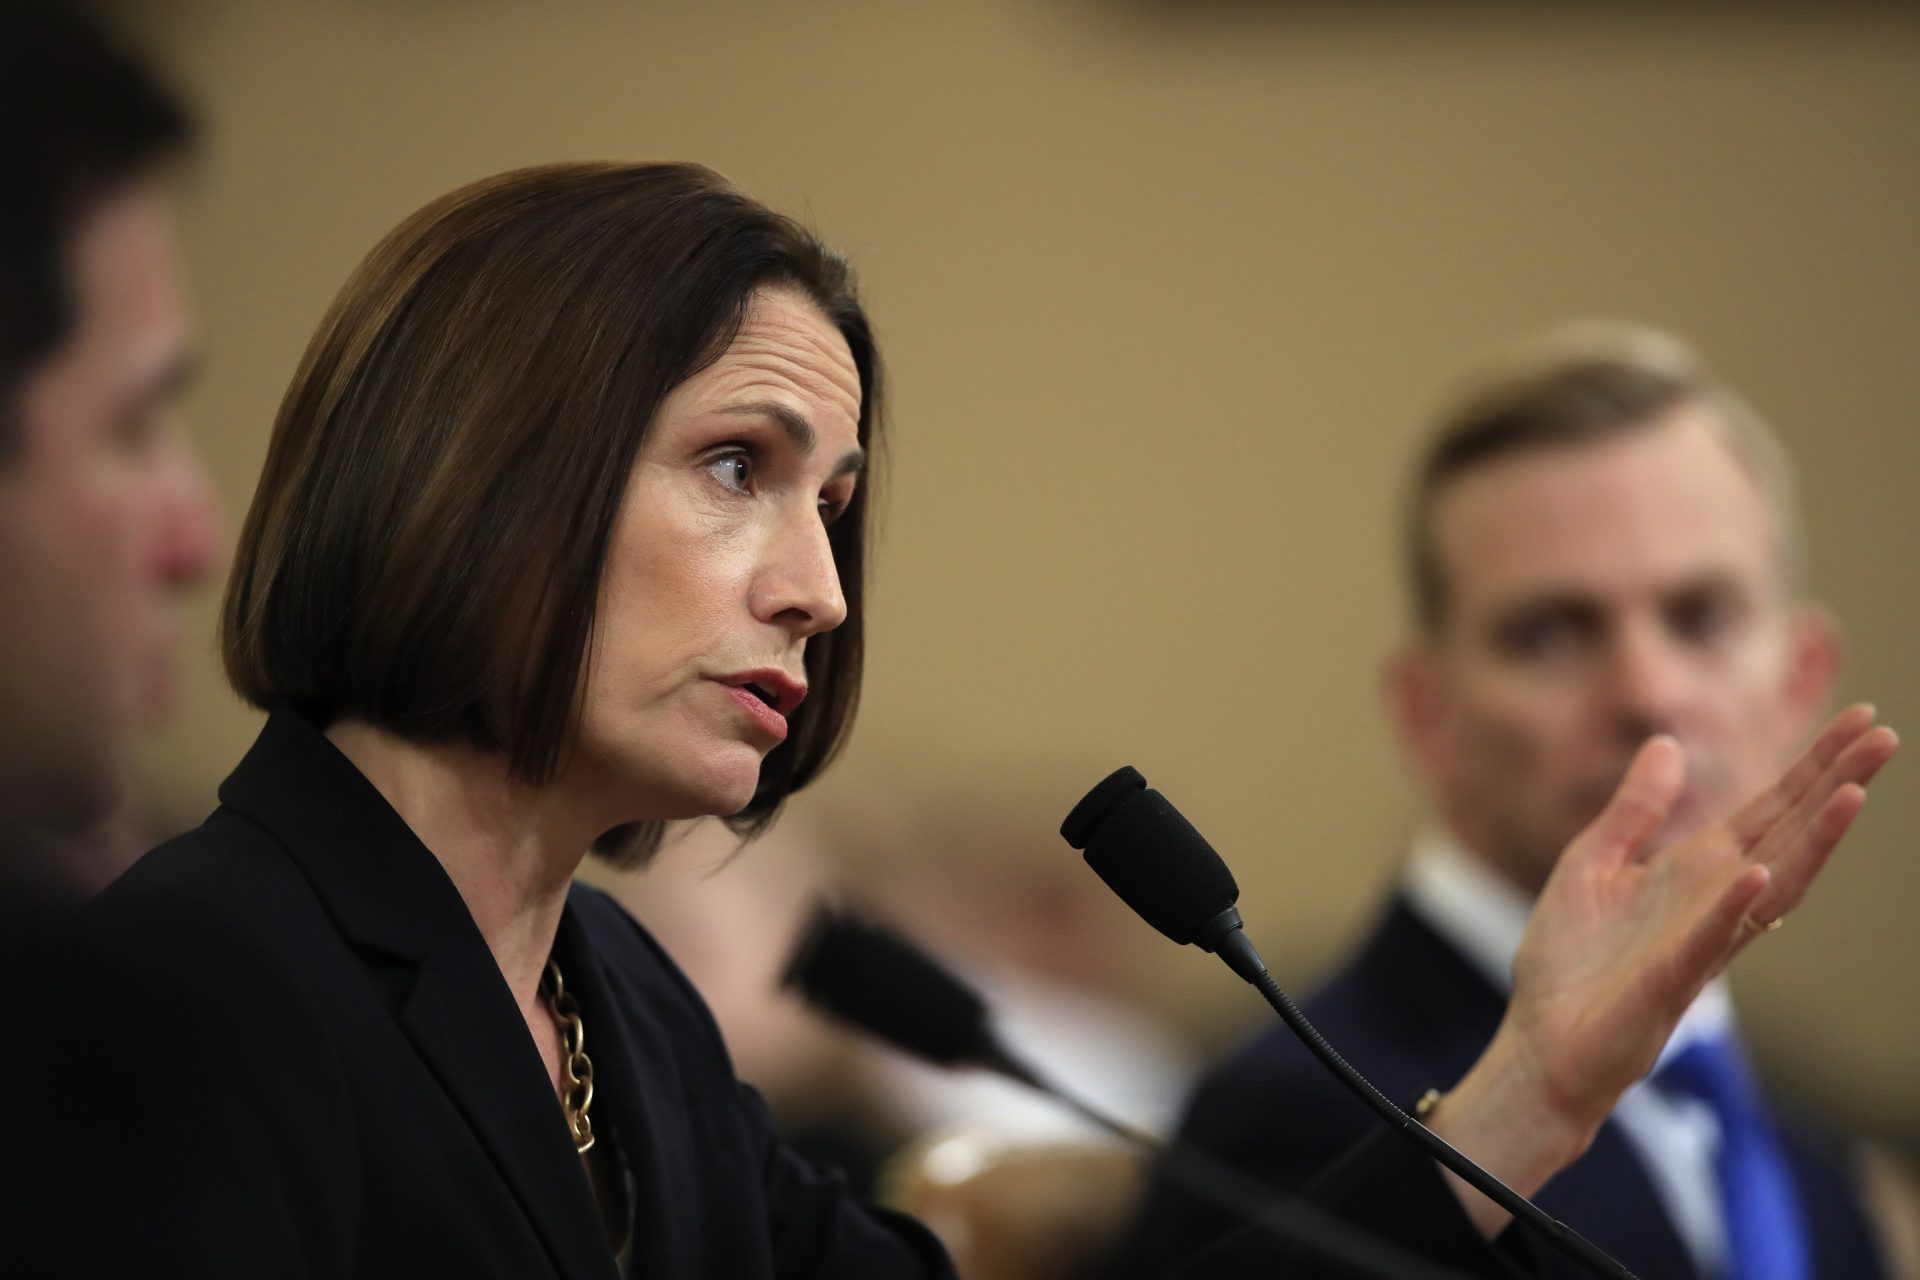 Former White House national security aide Fiona Hill, and David Holmes, a U.S. diplomat in Ukraine, right, testify before the House Intelligence Committee on Capitol Hill in Washington, Thursday, Nov. 21, 2019, during a public impeachment hearing of President Donald Trump's efforts to tie U.S. aid for Ukraine to investigations of his political opponents.